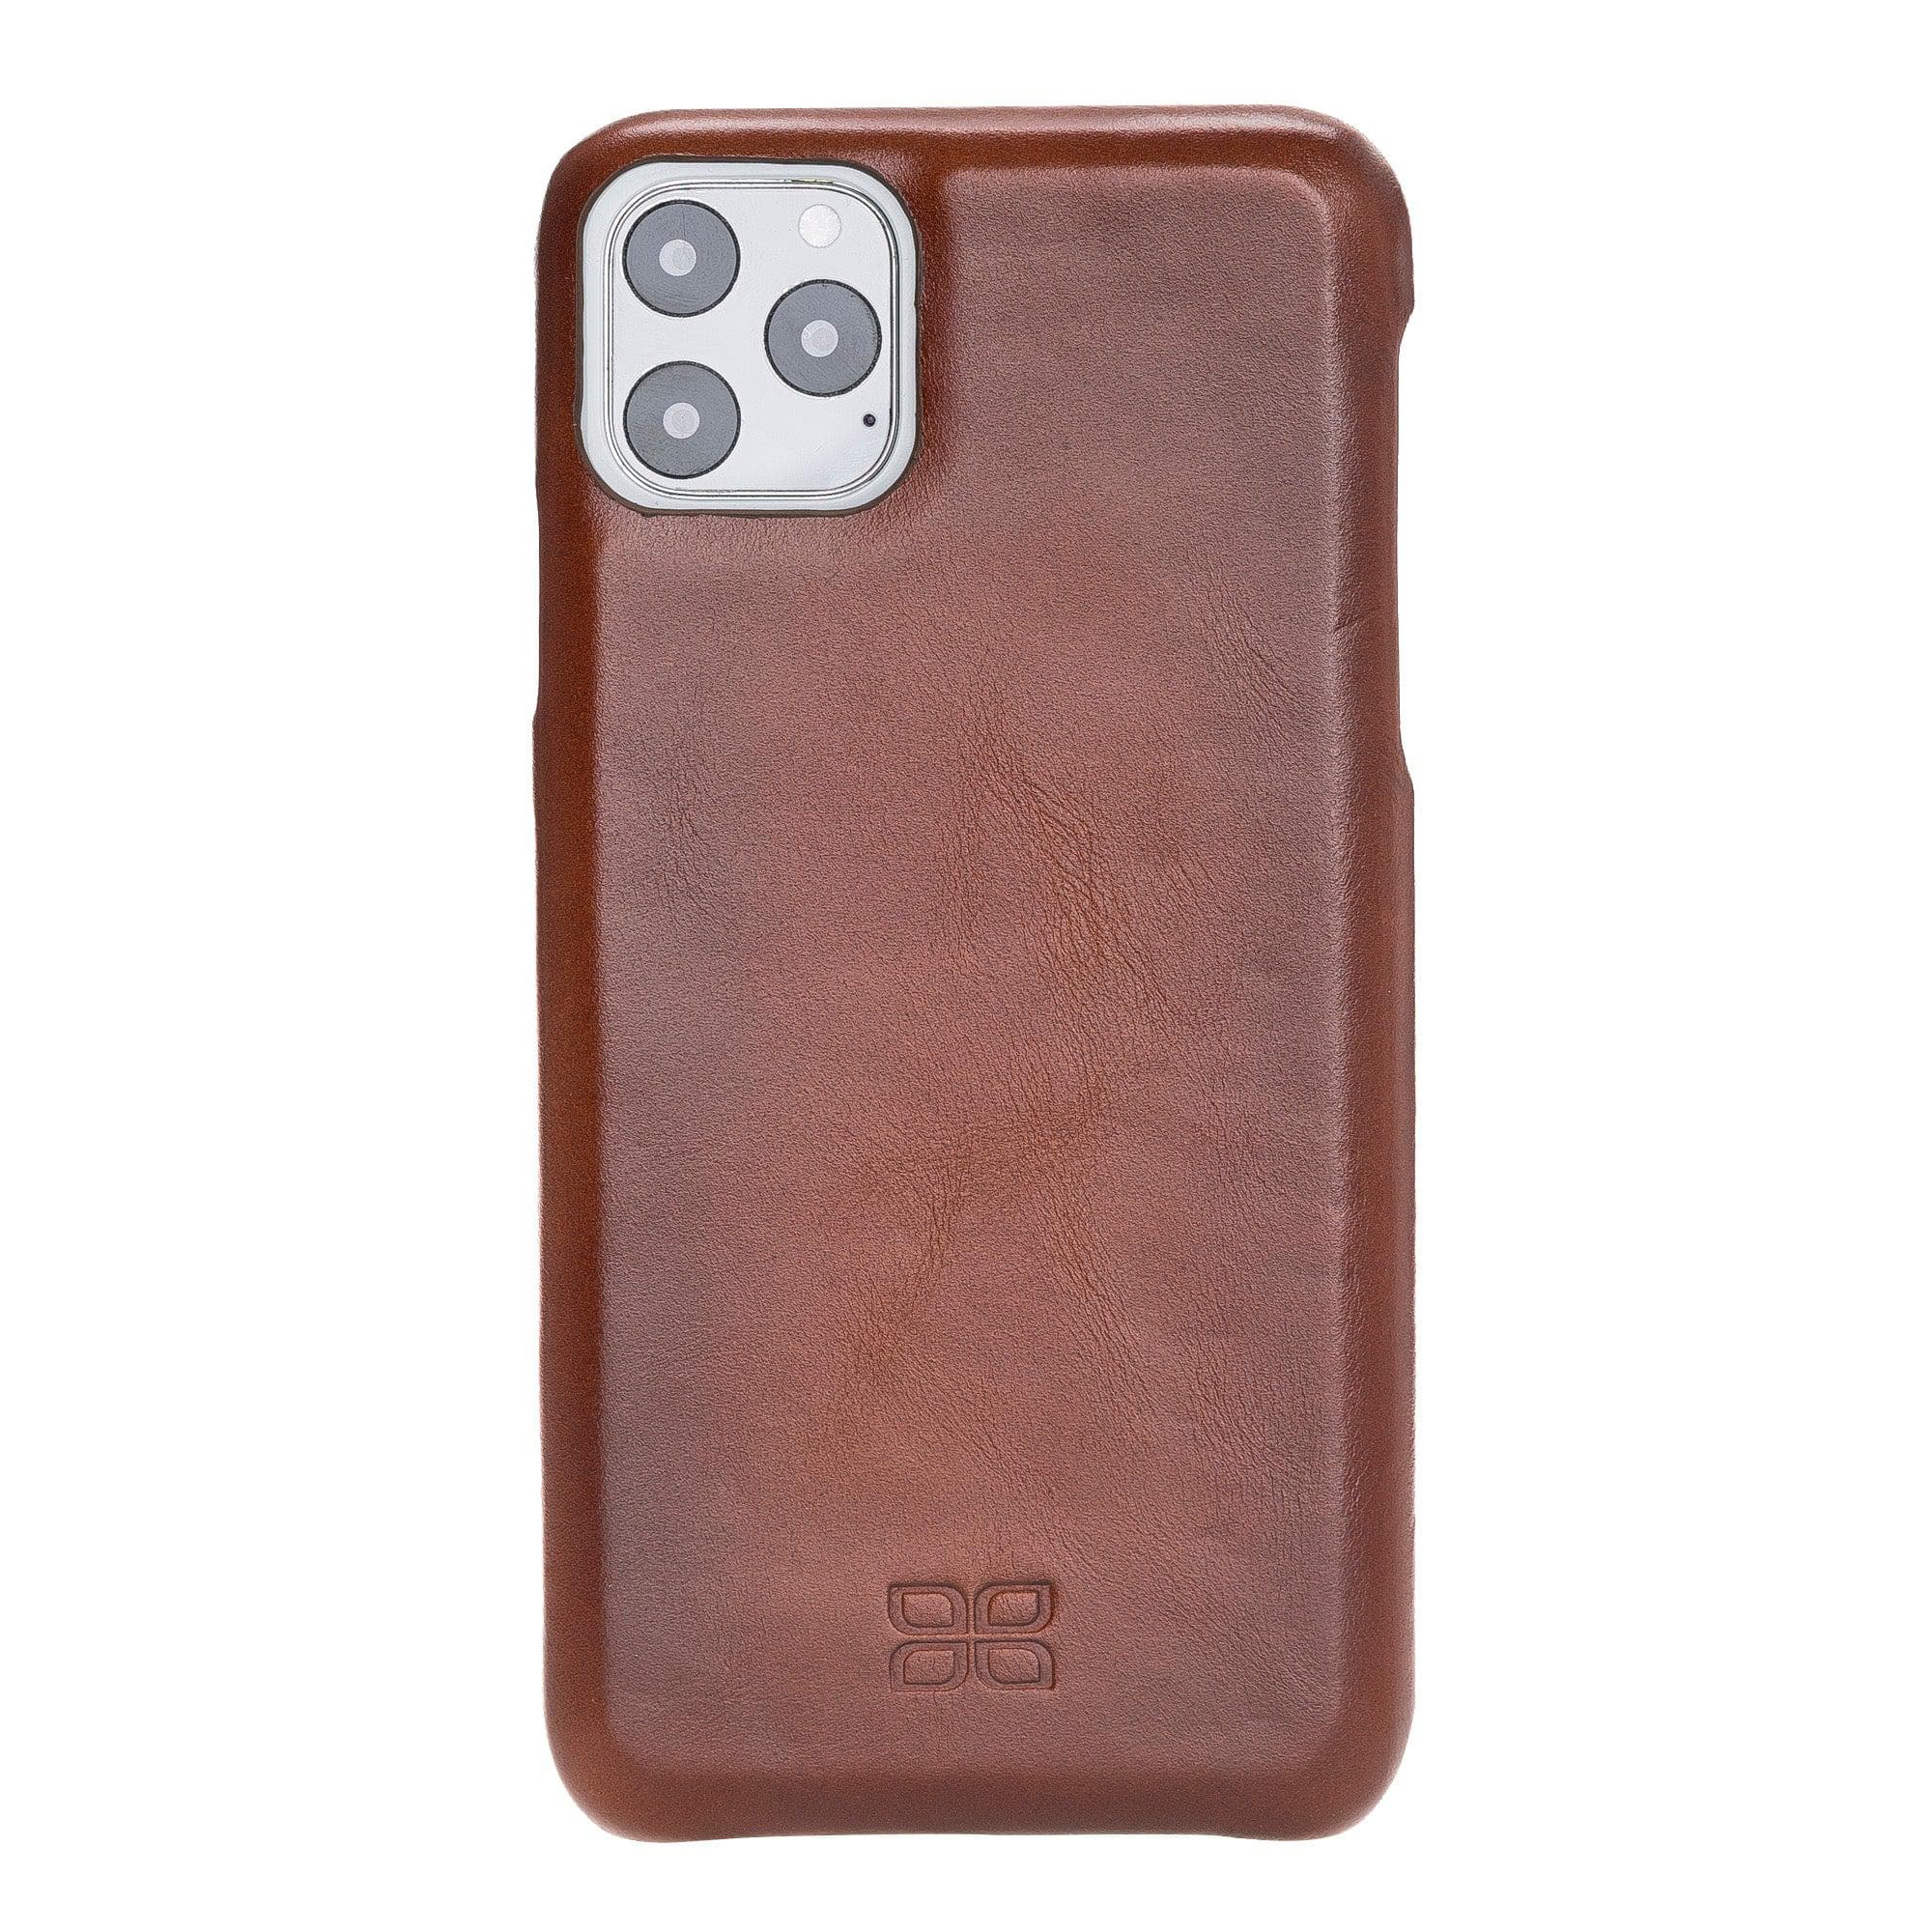 Bouletta Fully Leather Back Cover for Apple iPhone 11 Series İPhone 11 Pro Max / Tan Bouletta LTD